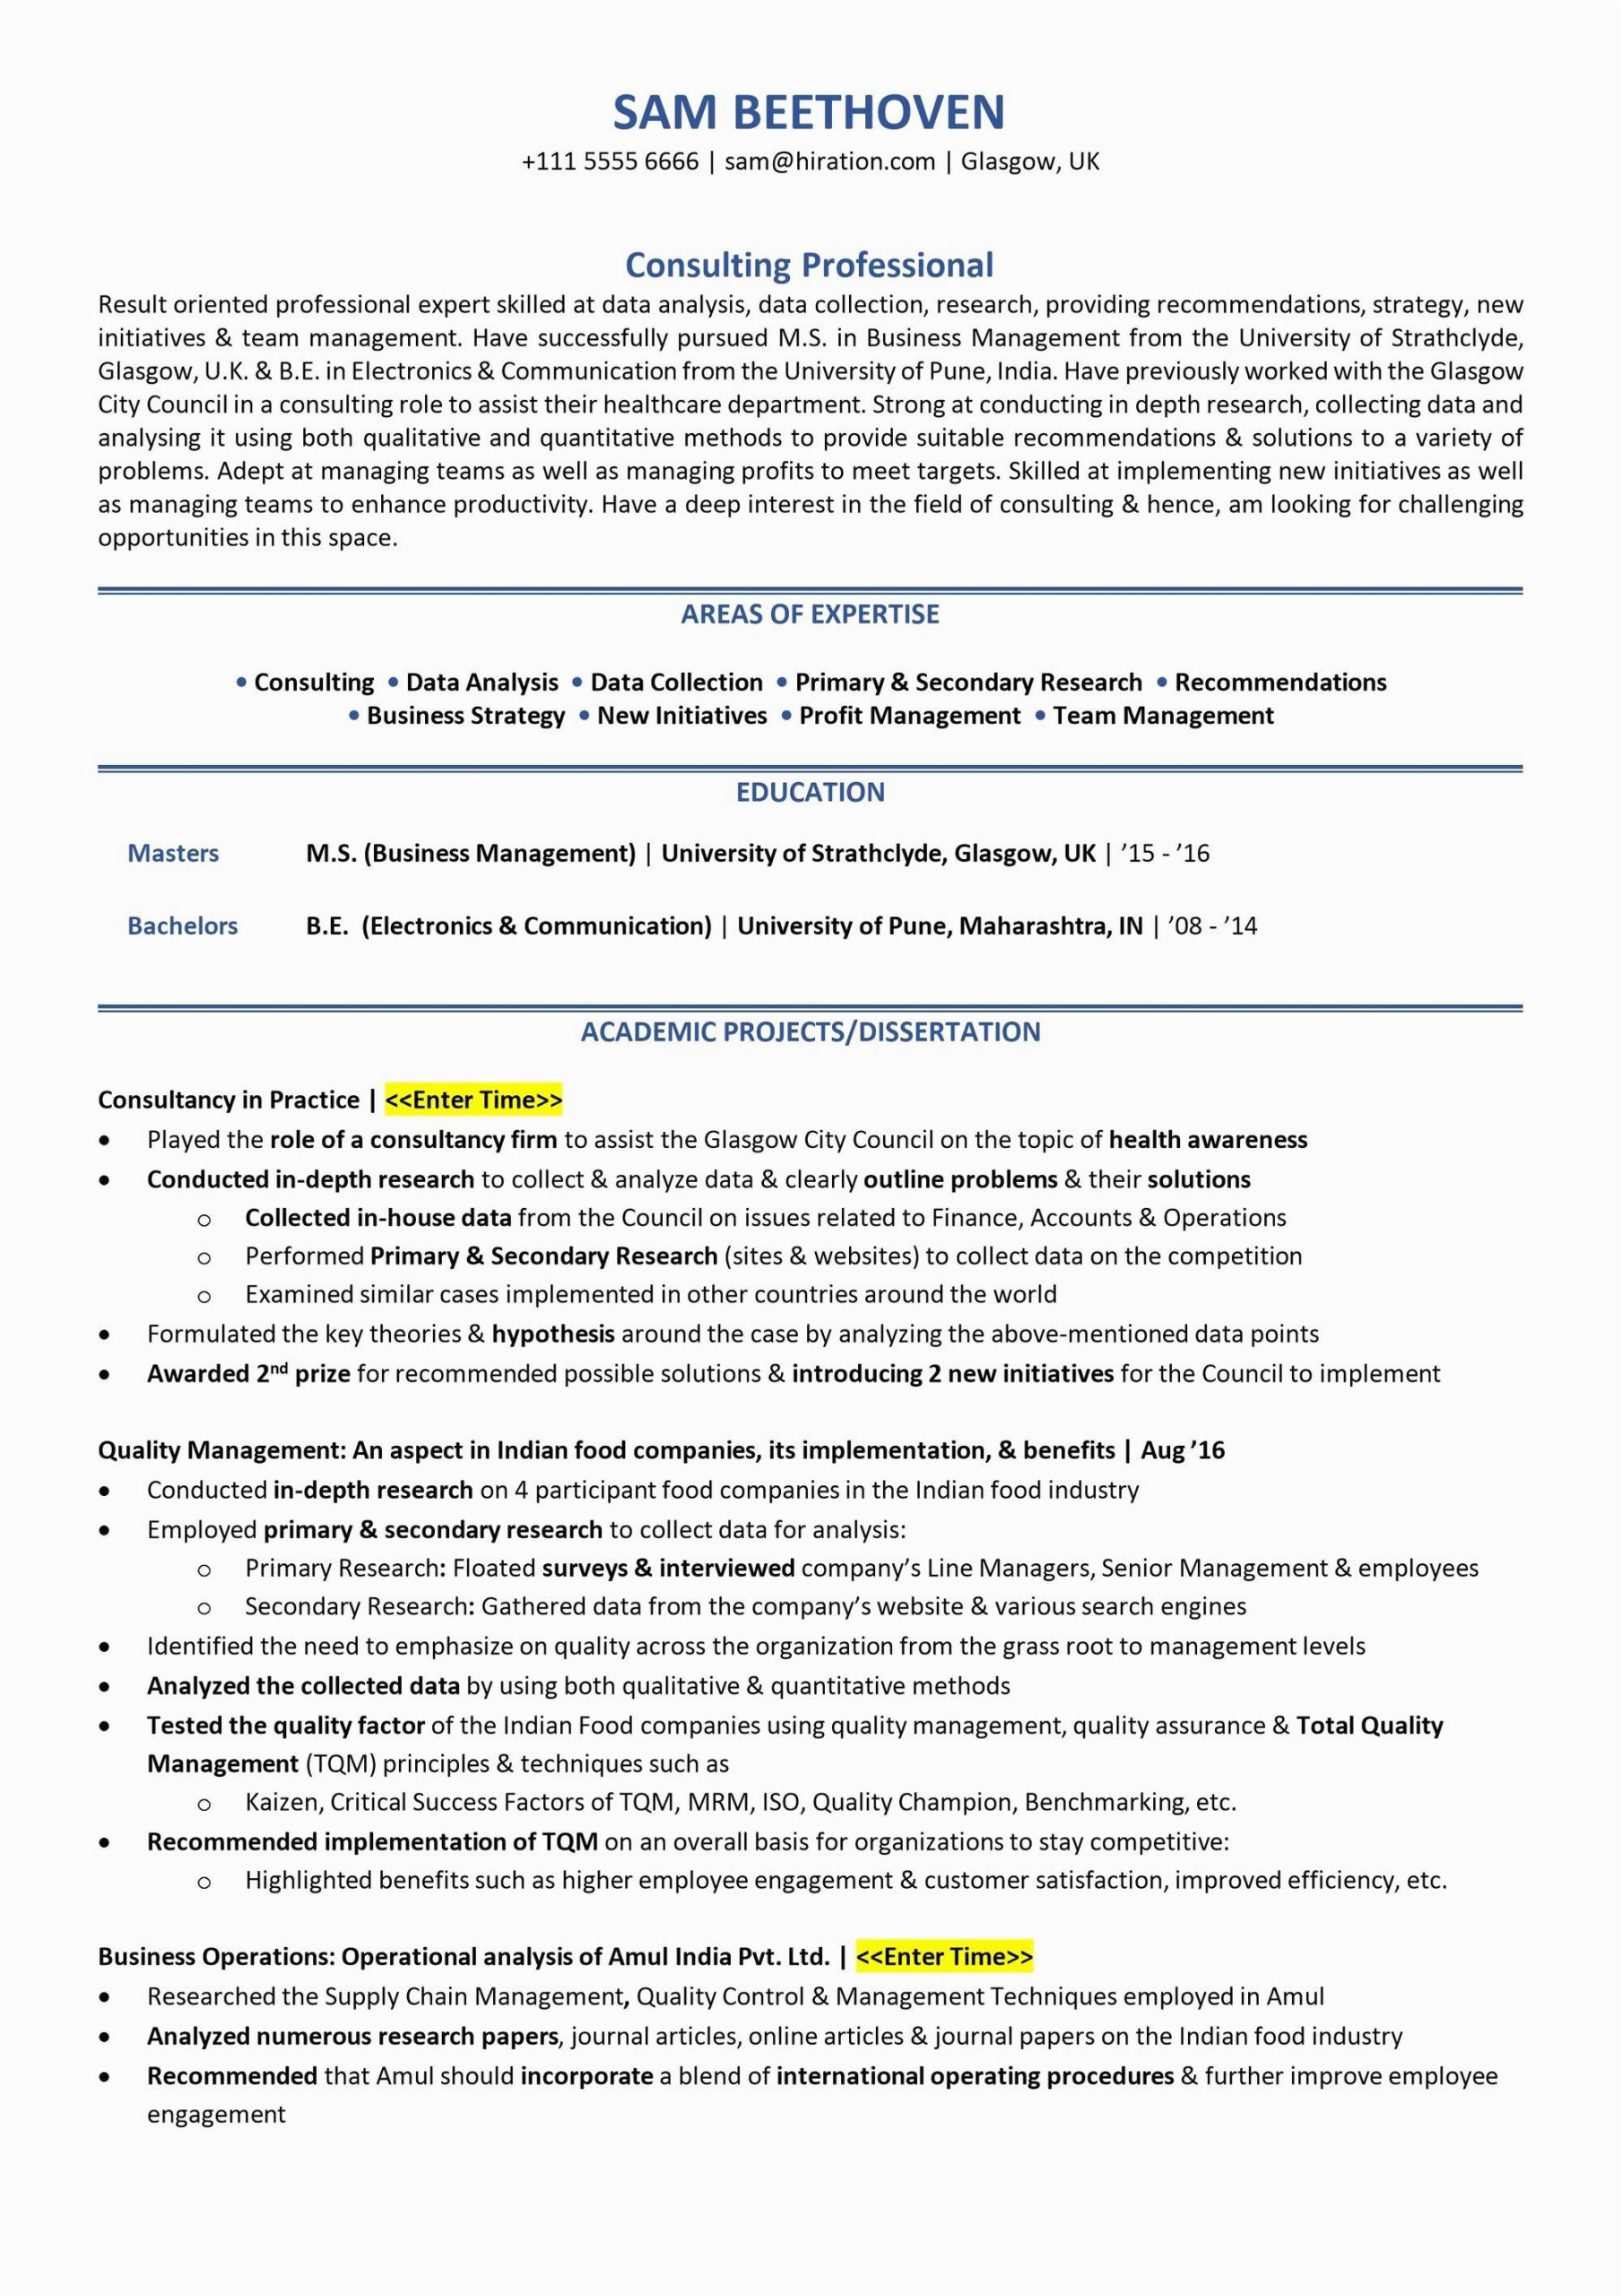 Sample Resume Templates for College Students Sample Resume College Student Fresh Student Resume [2019